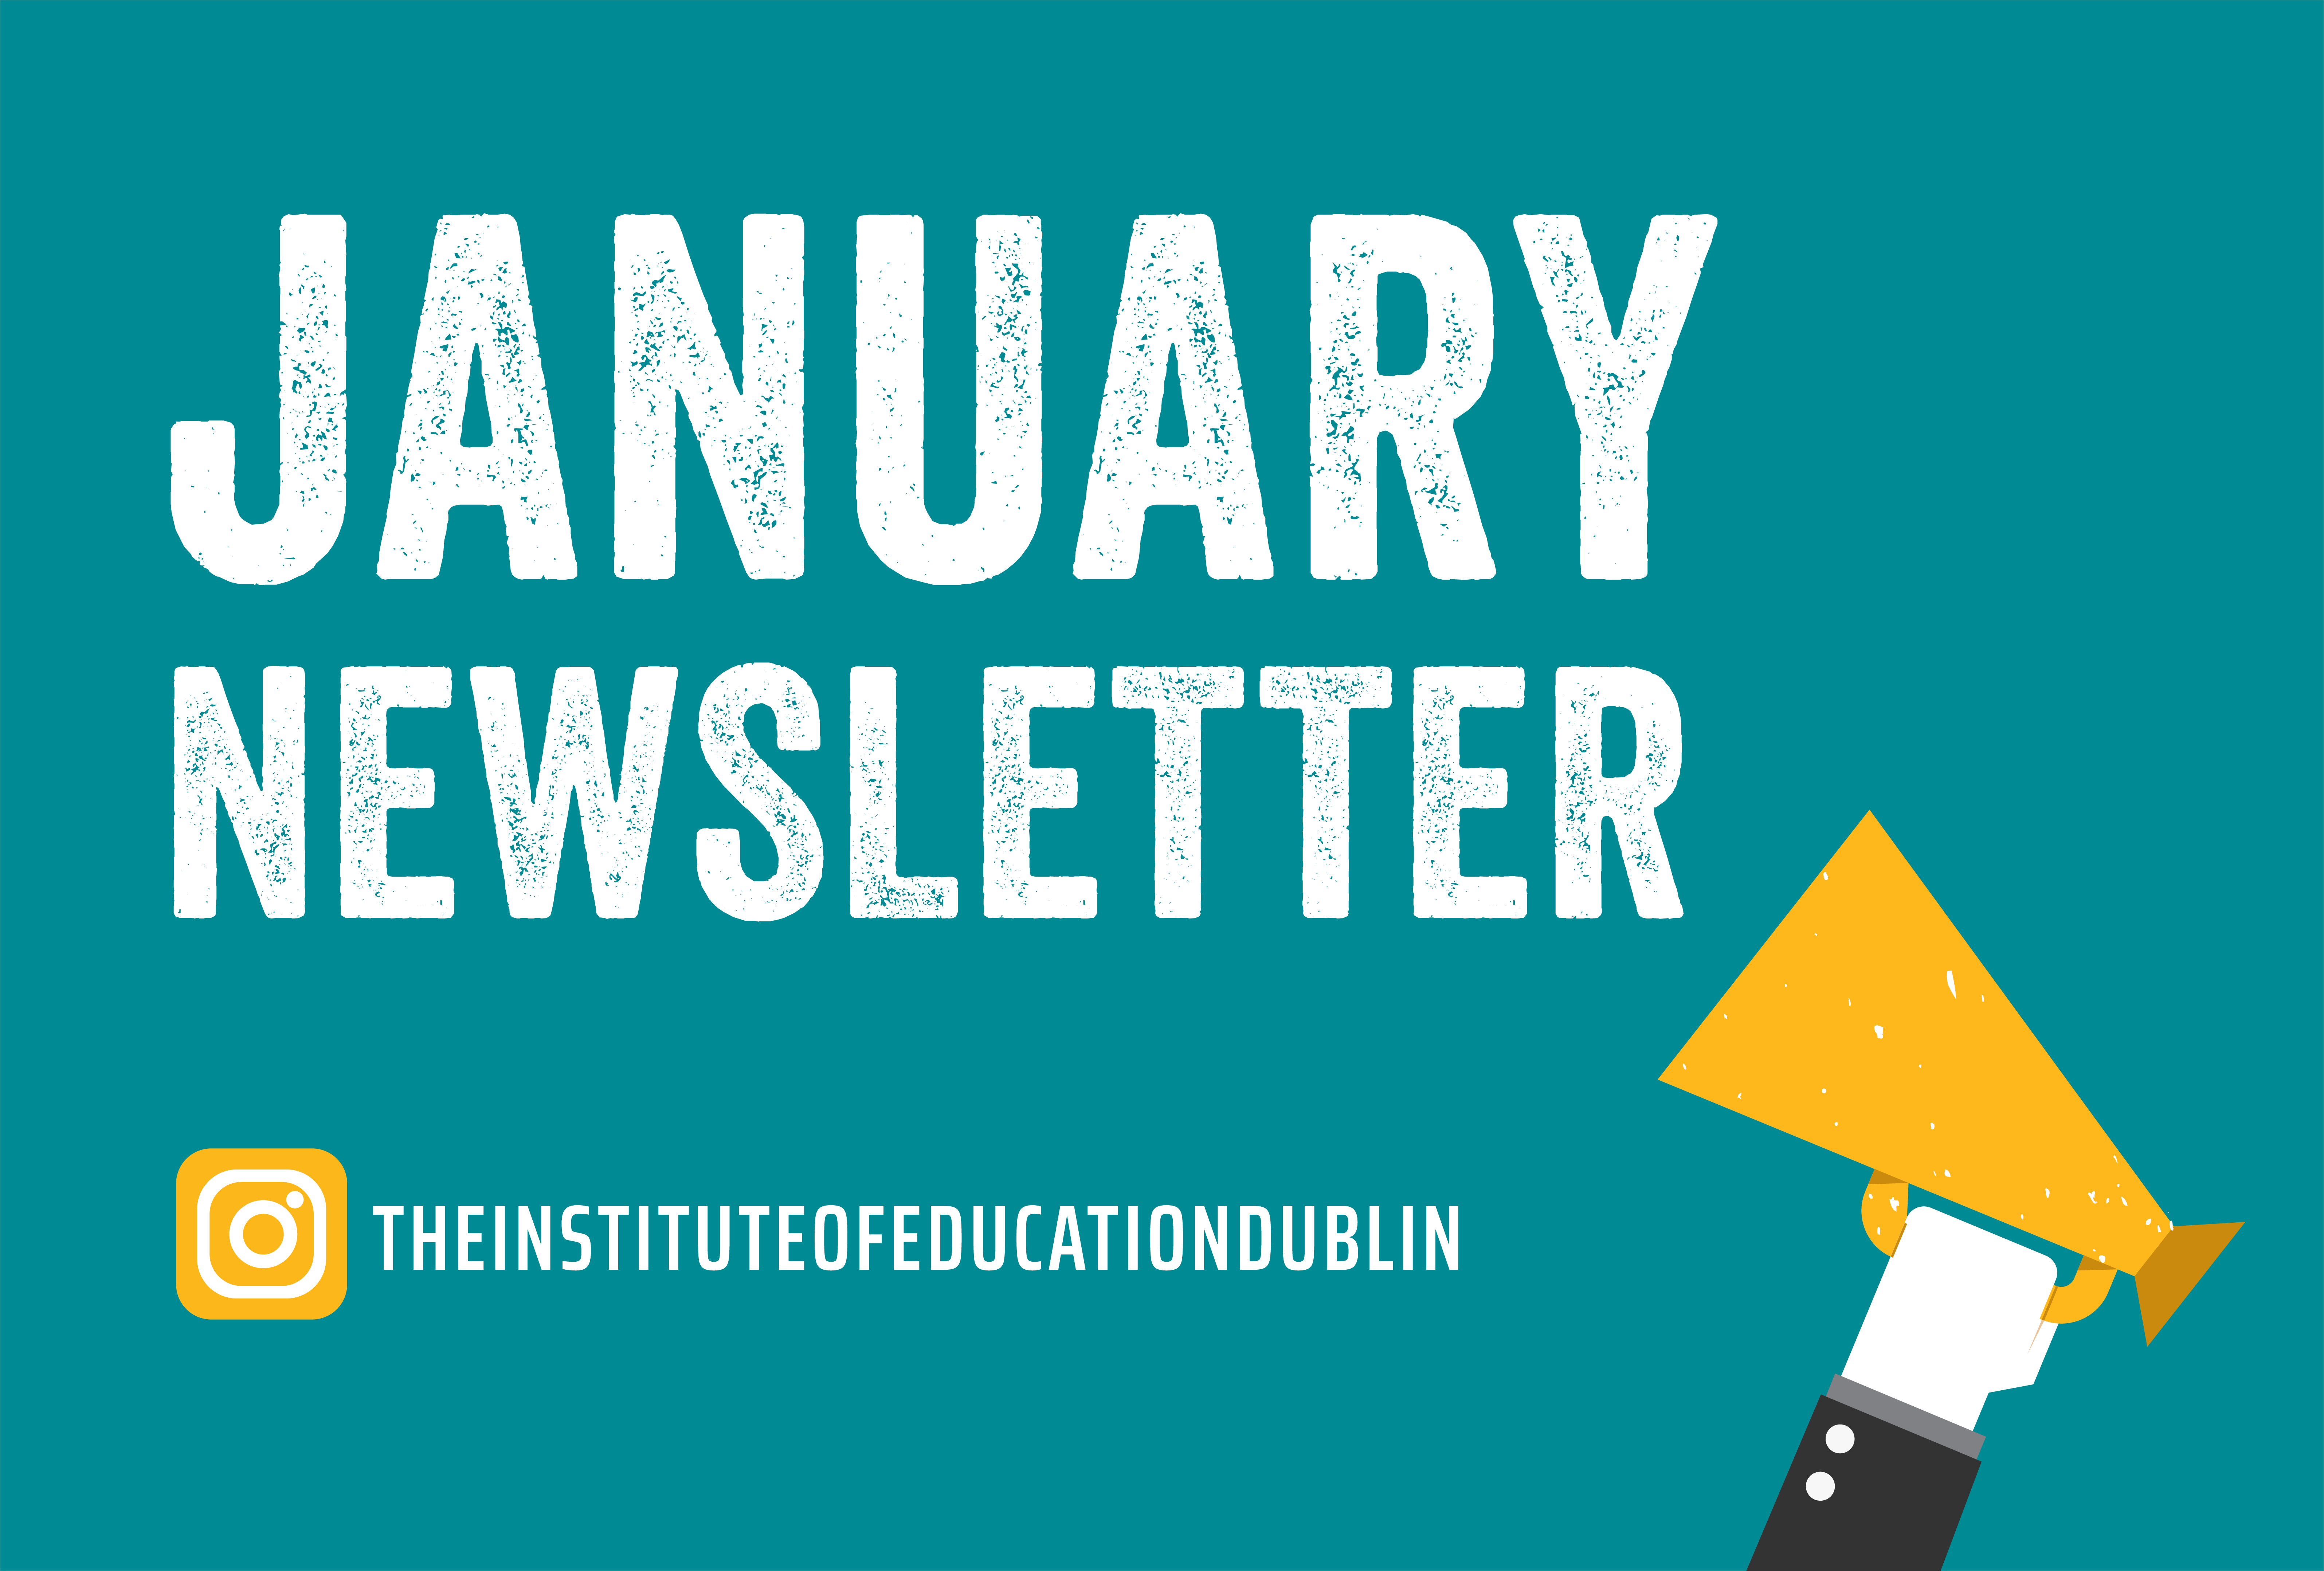 Monthly Calendar - January 2021 | Institute of Education